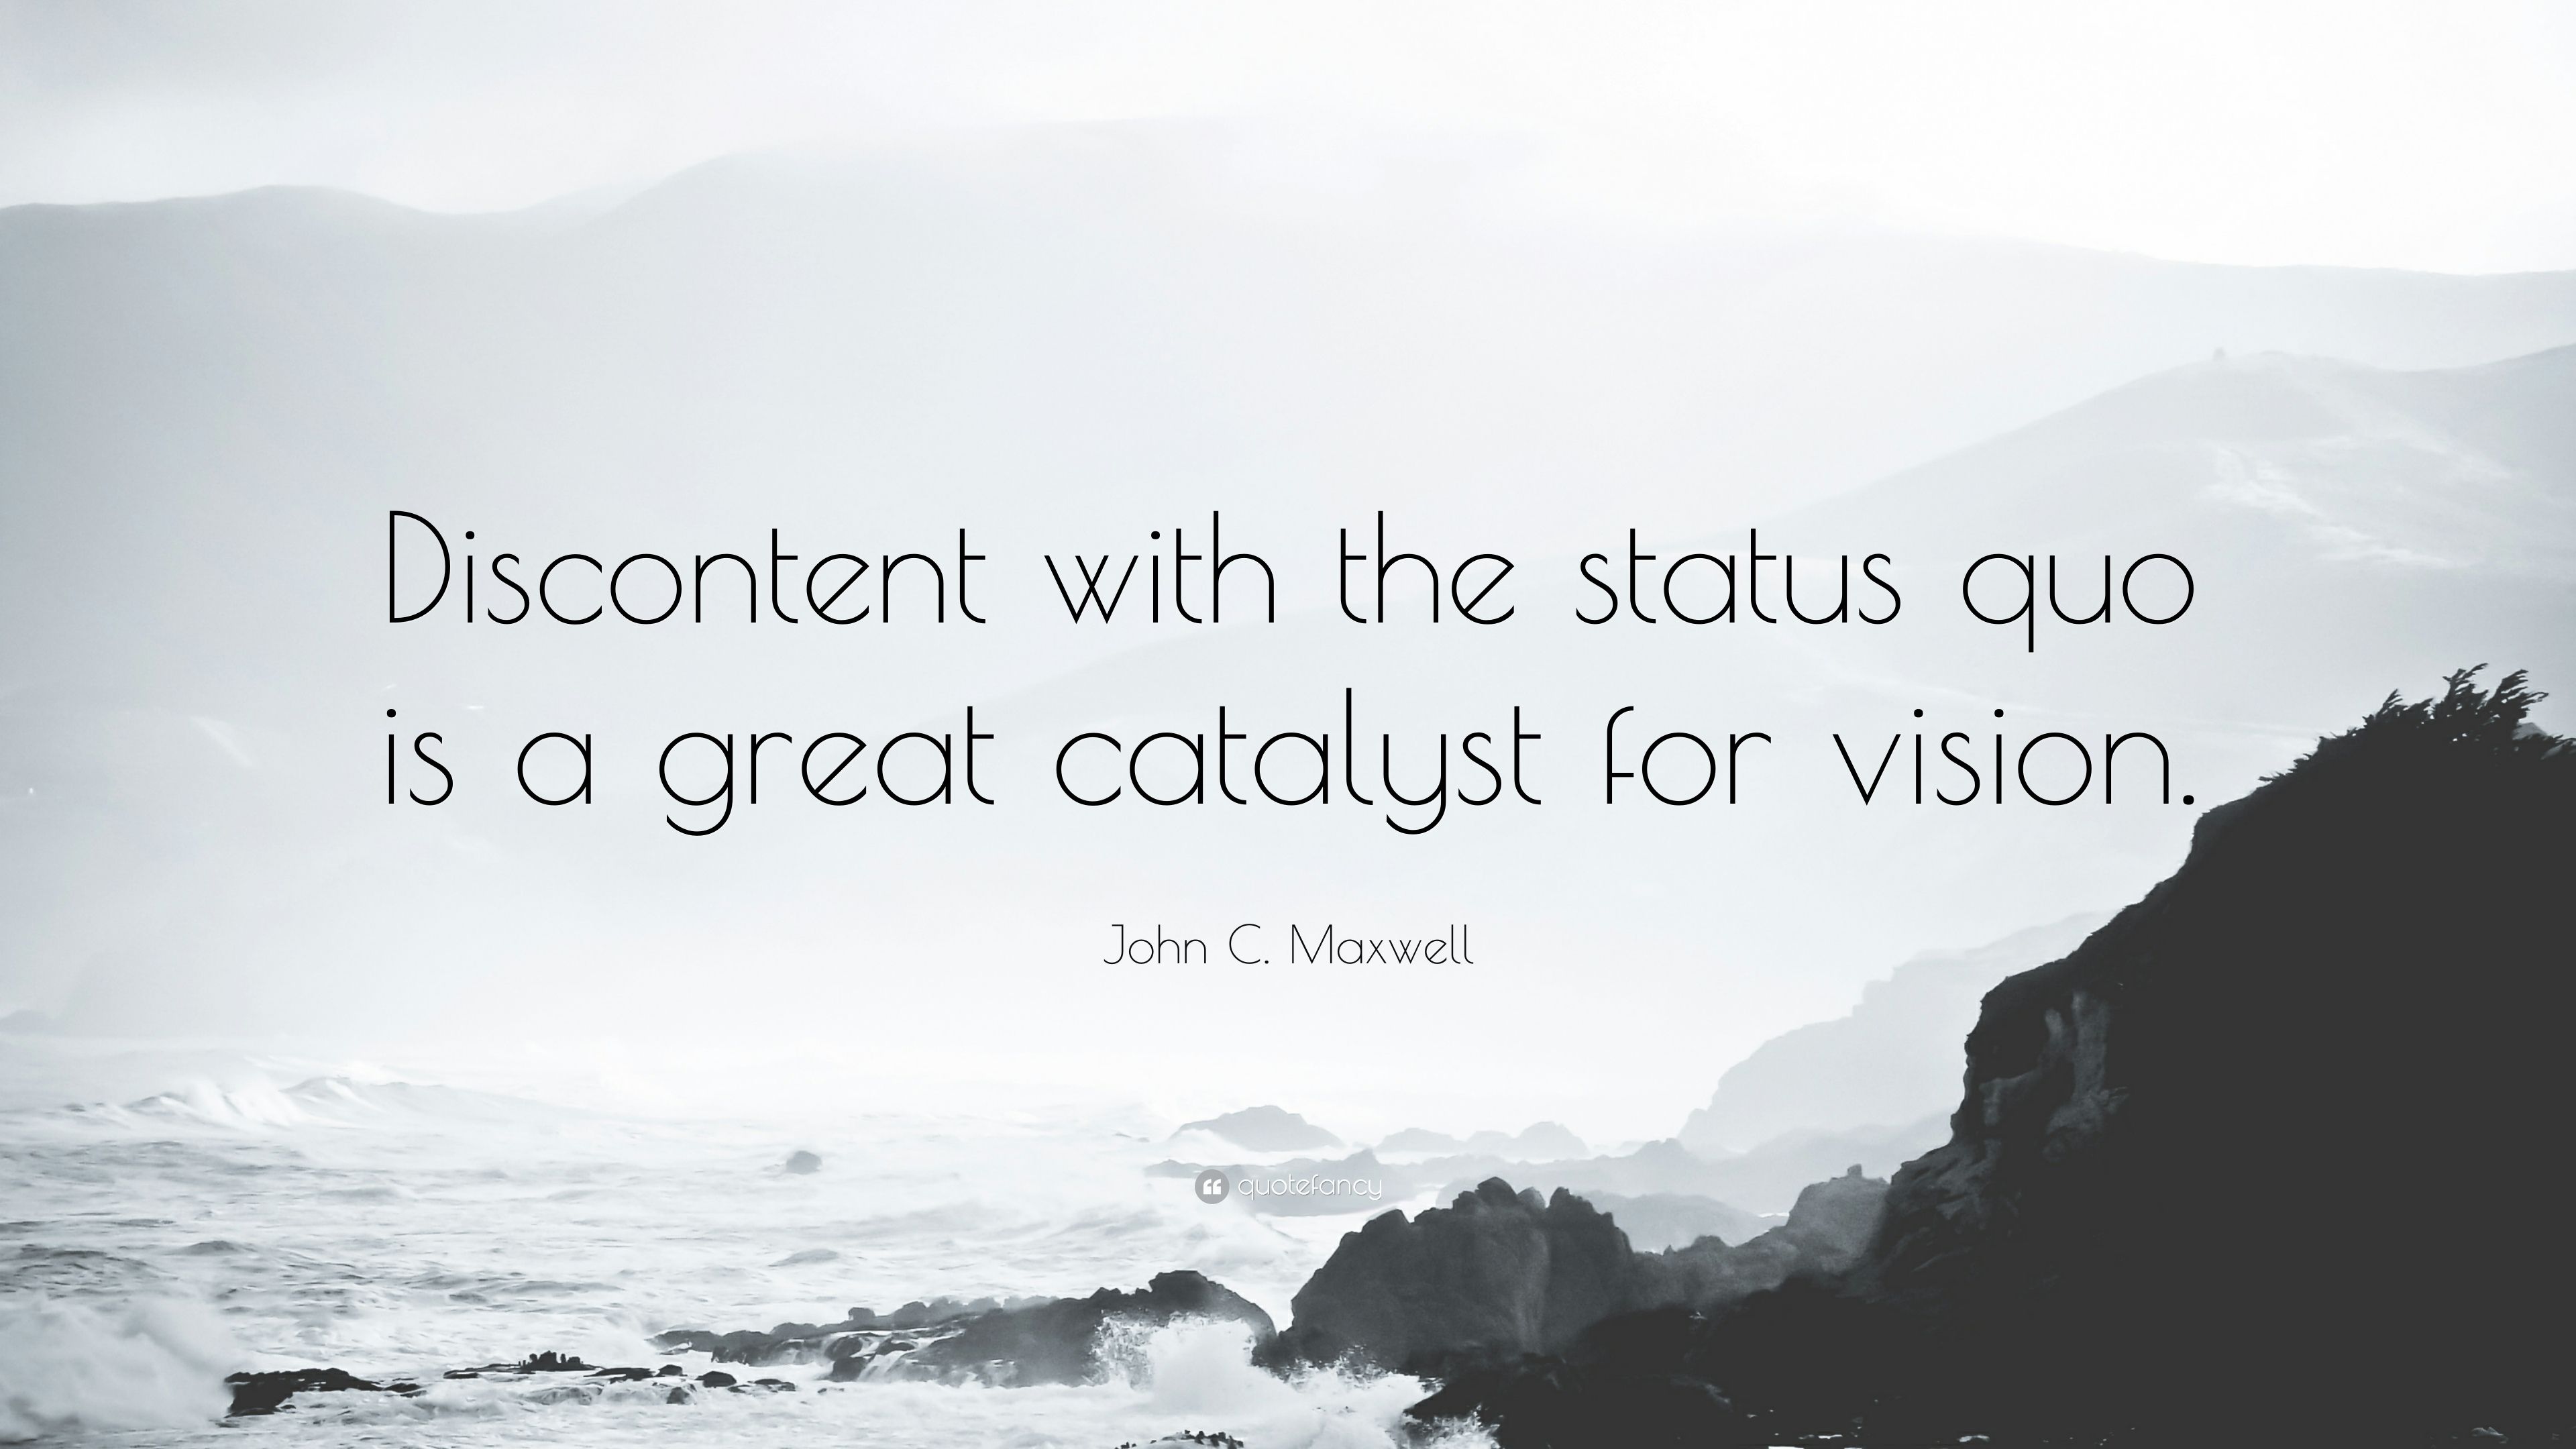 John C. Maxwell Quote: “Discontent with the status quo is a great